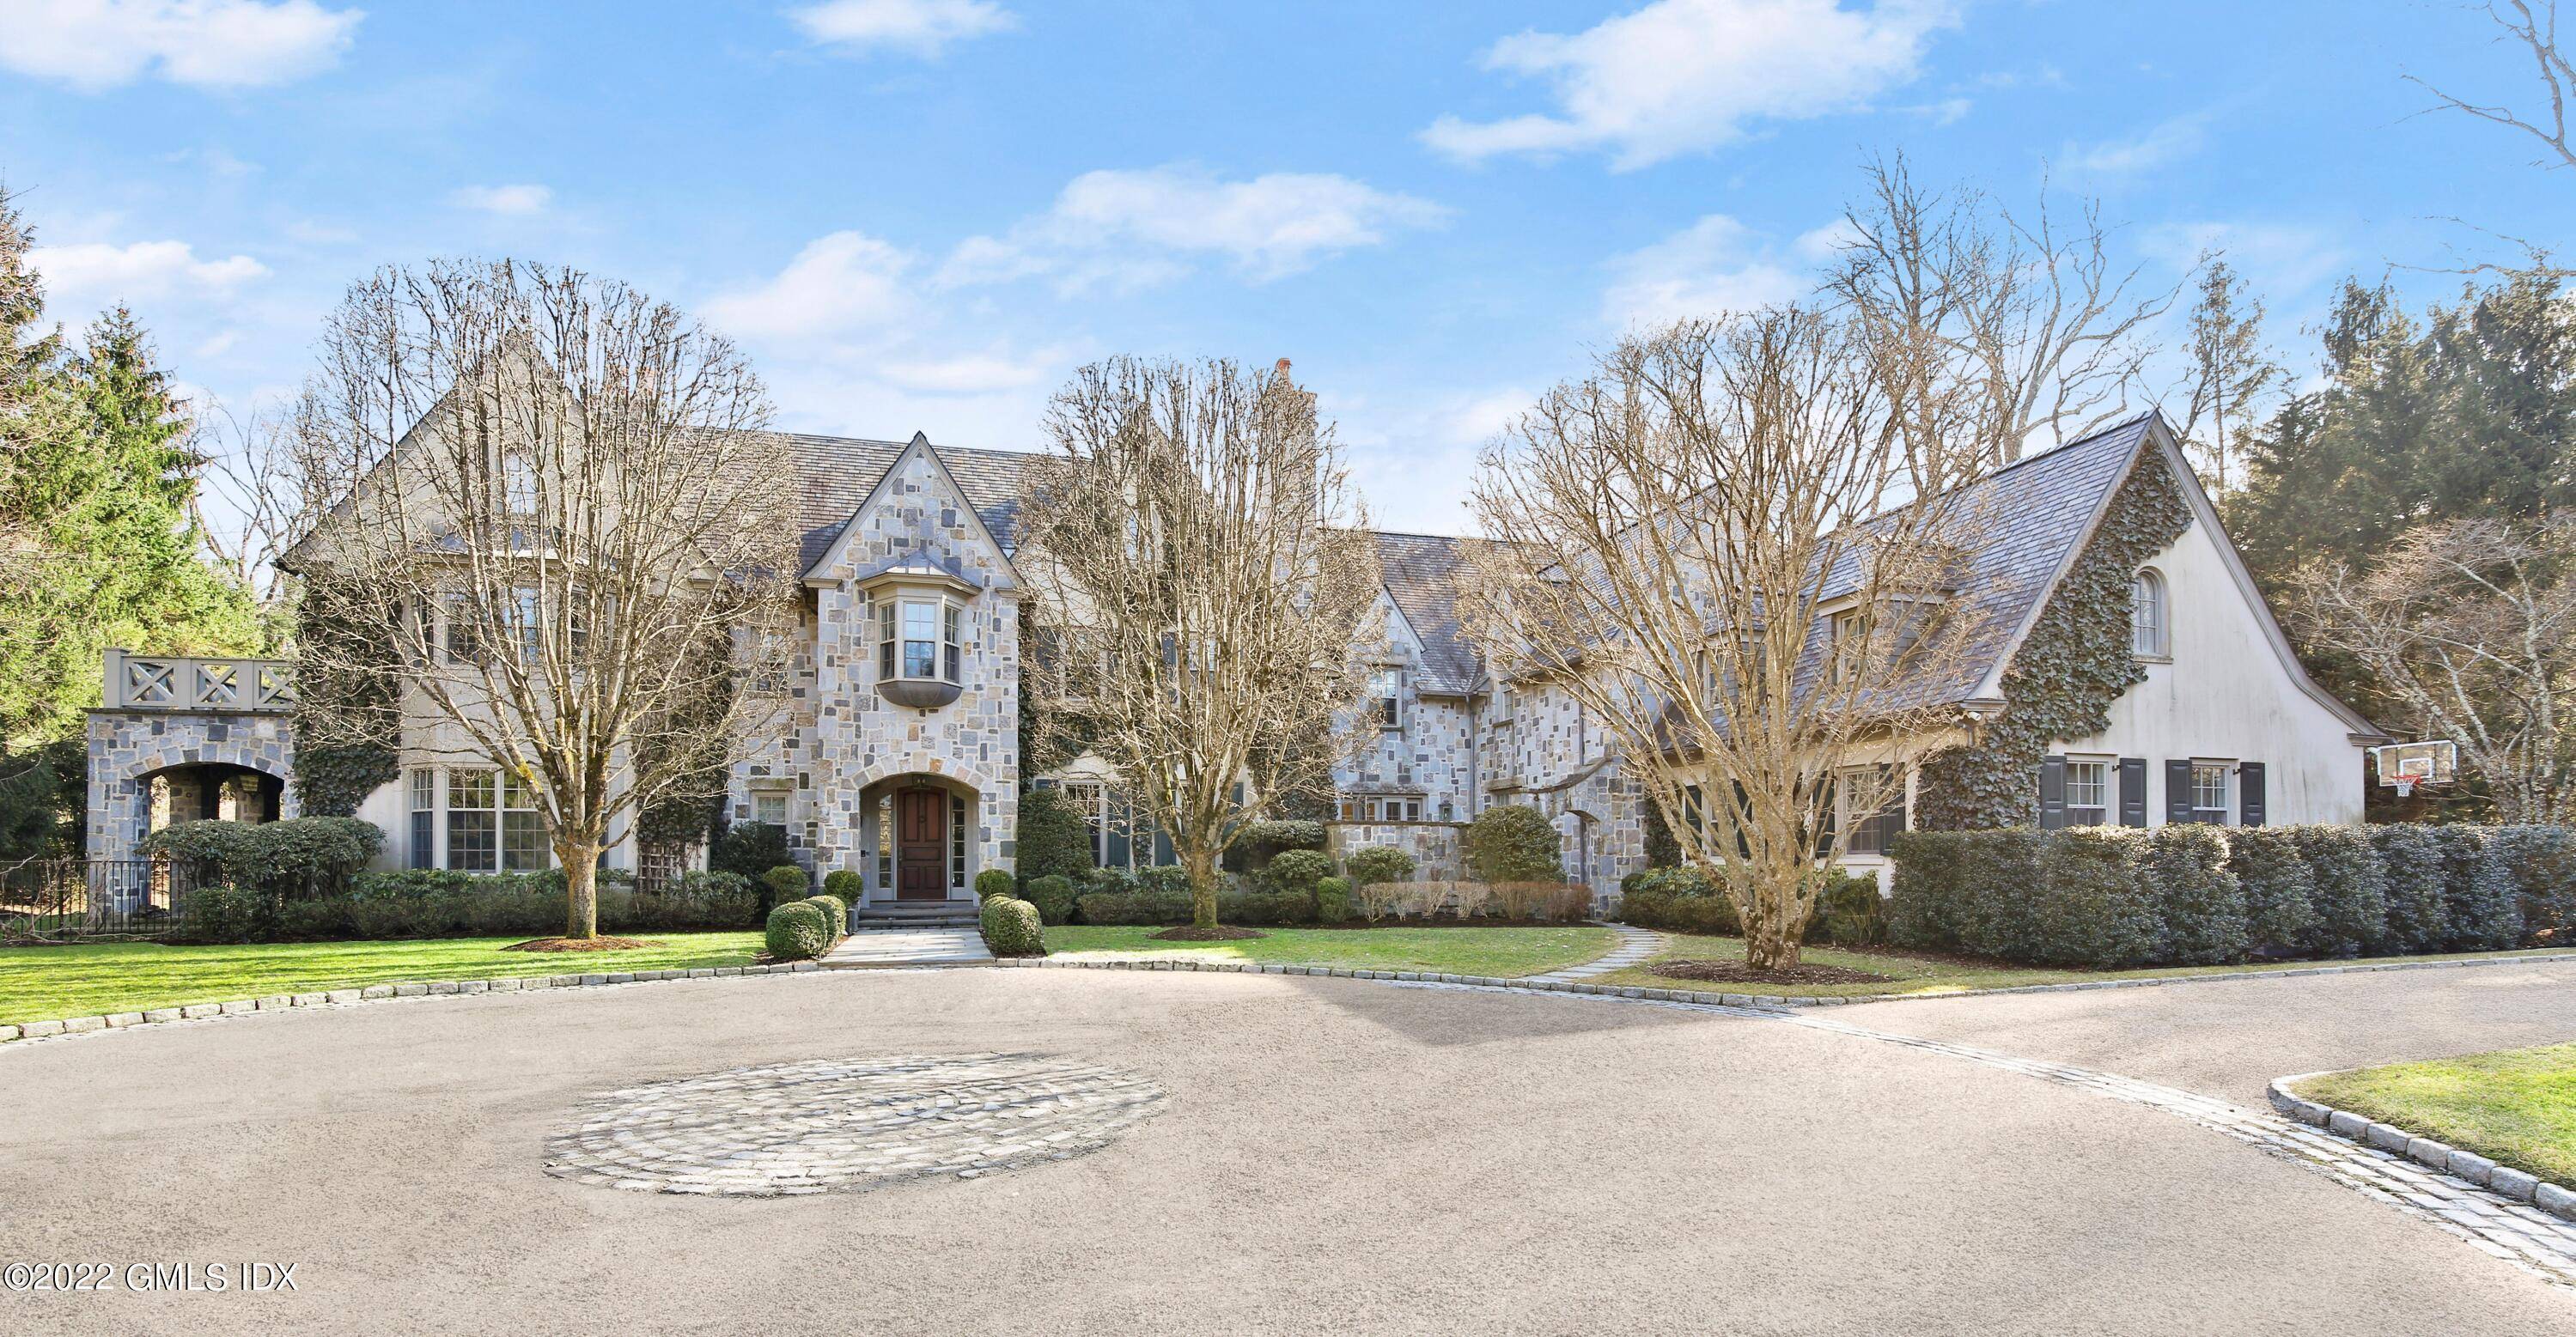 Stone manor built by Aberdeen Properties and tastefully expanded and customized by the owners.